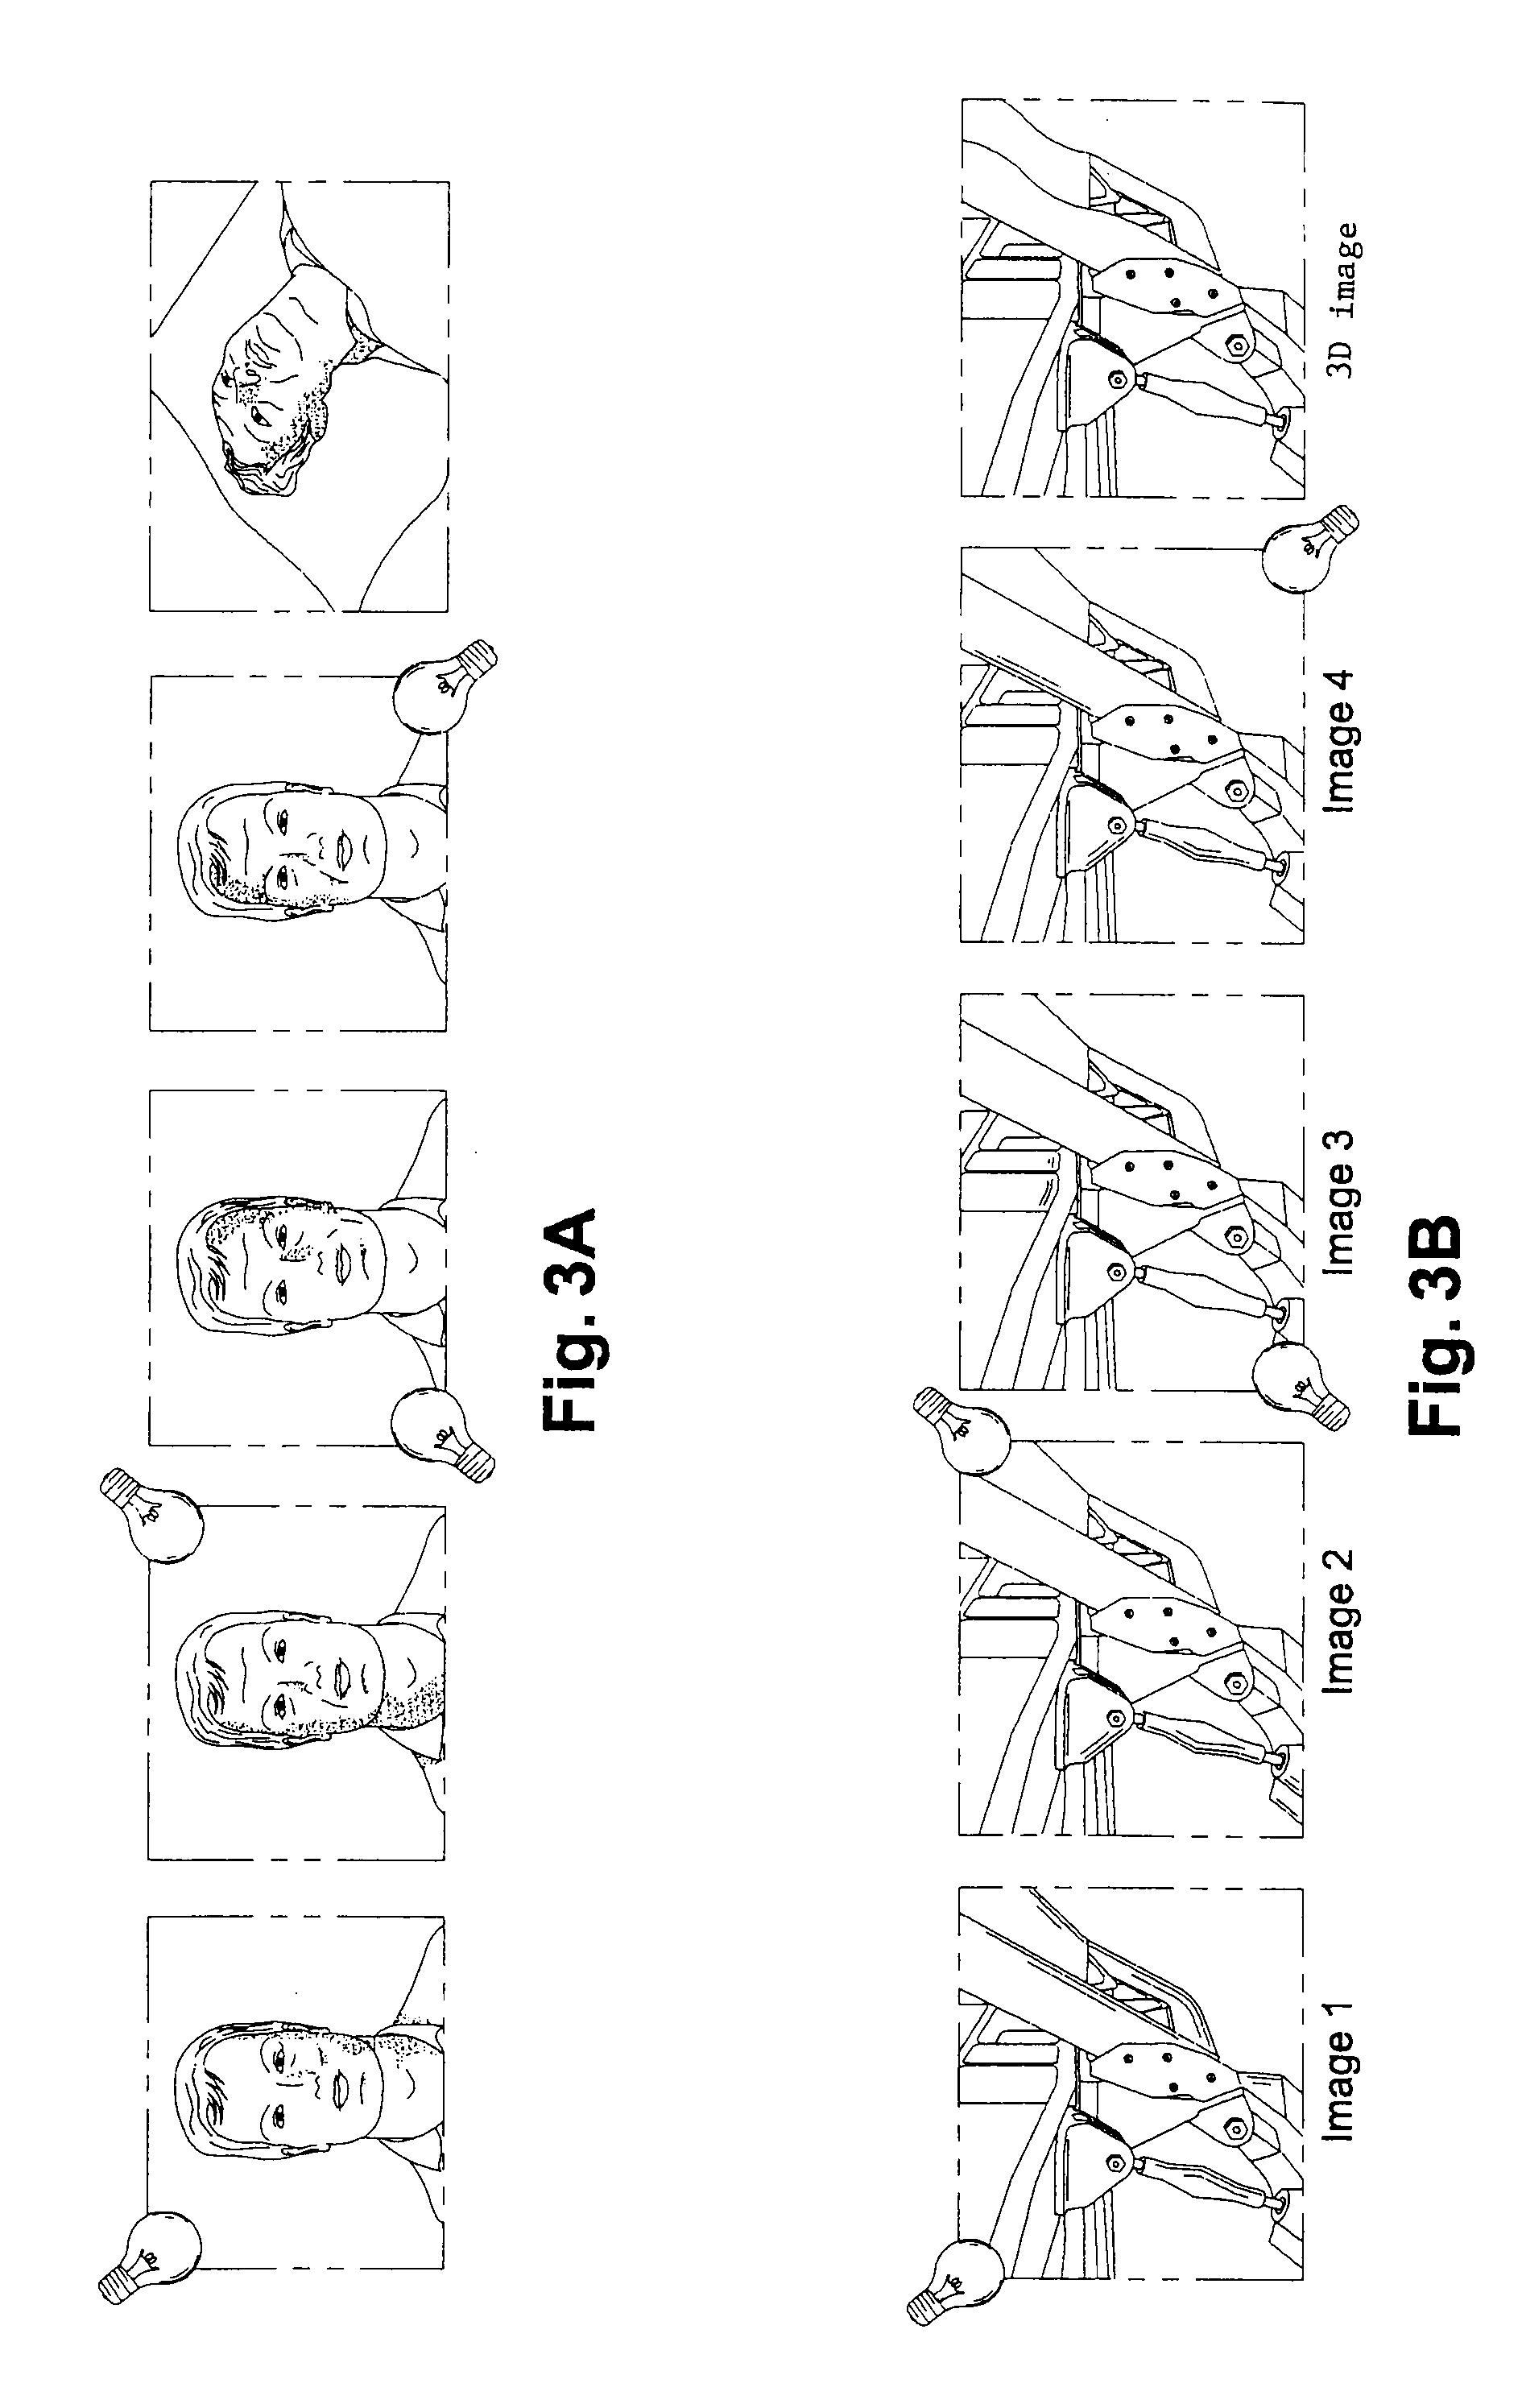 Method and system for the remote inspection of a structure